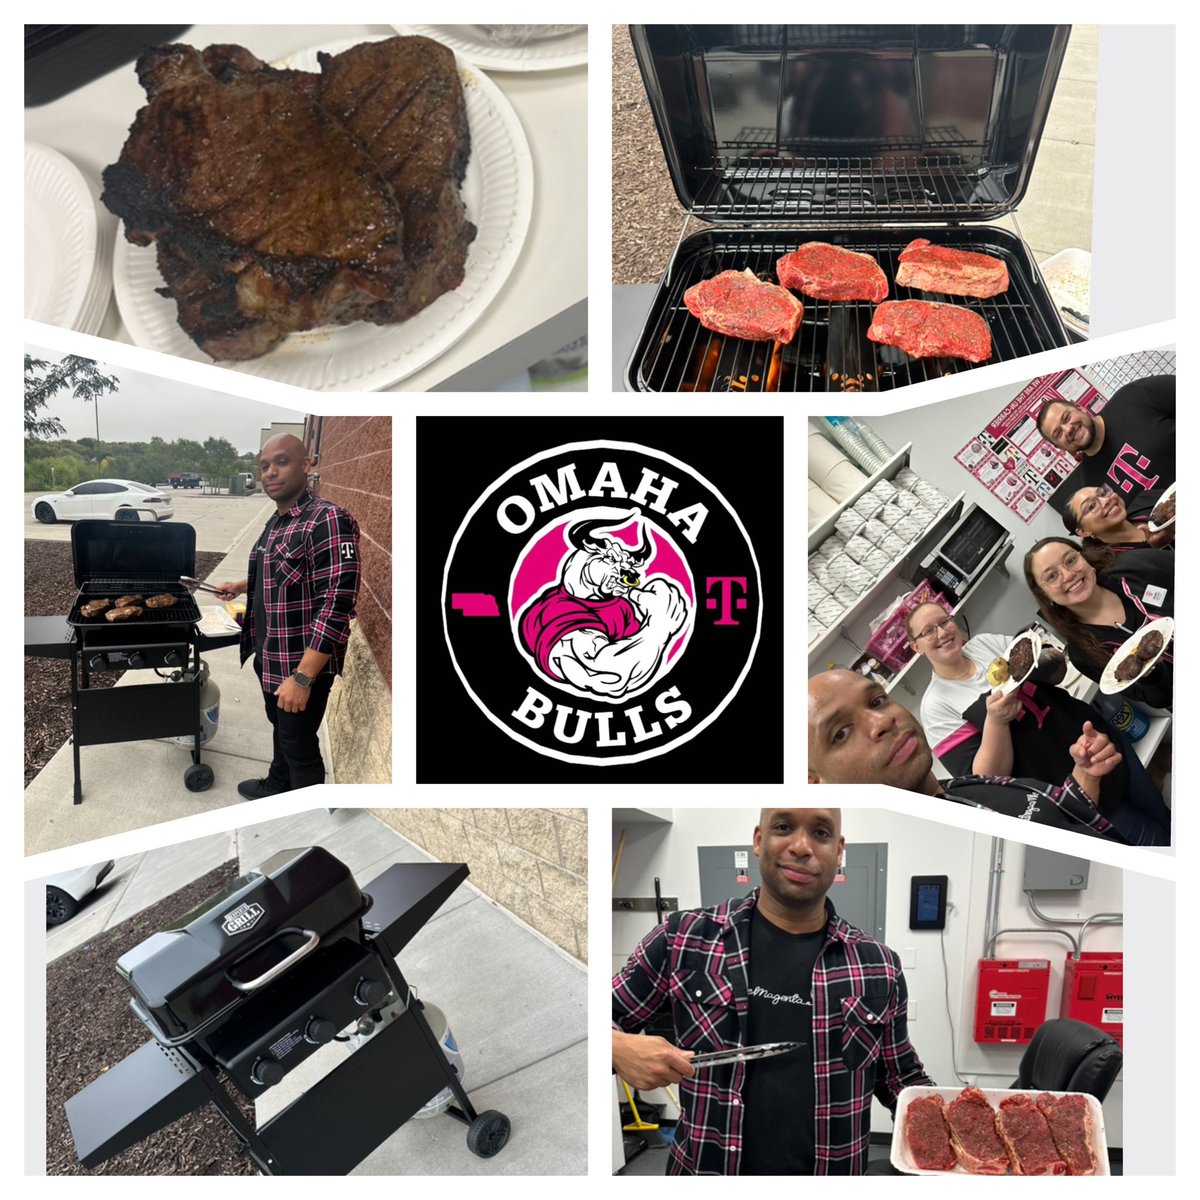 Just grilling over here at 909E on this beautiful Friday !! Shoutout to this team for winning my contest!! Great job !! #SeriousFun #Omaha @domjrcoleman @SteveLessor